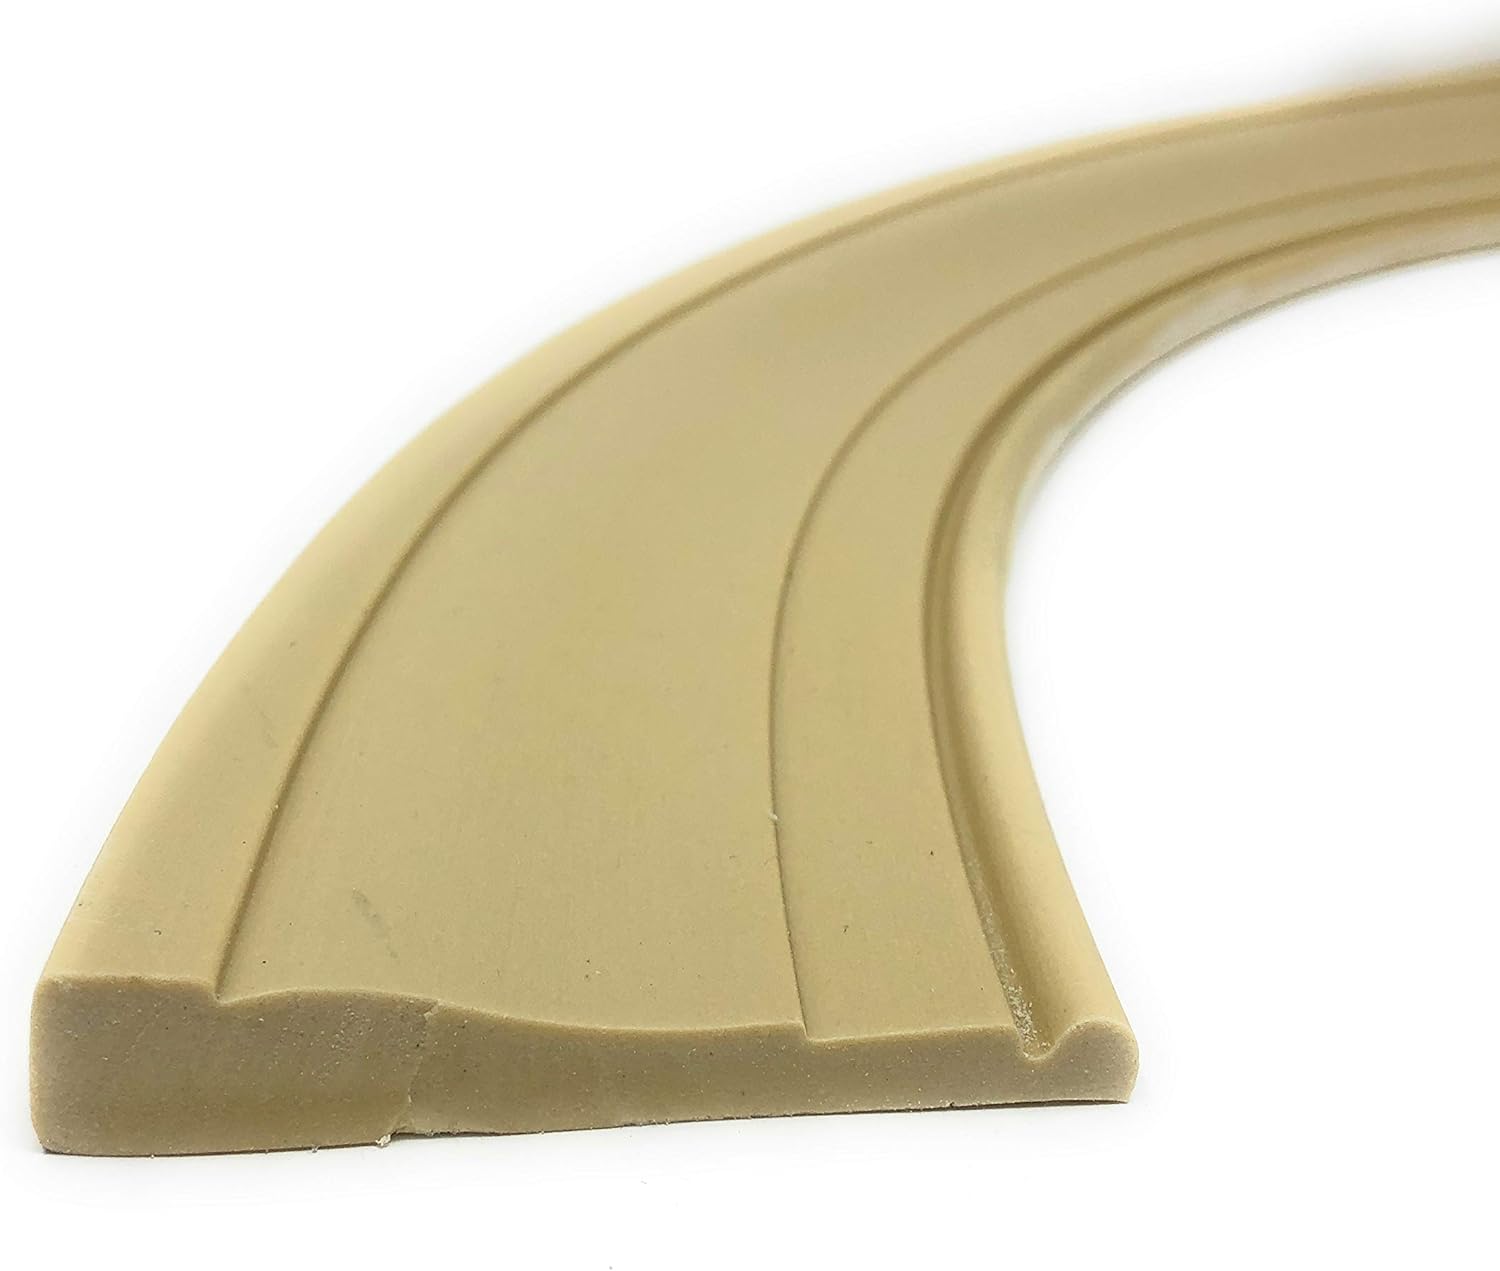 FLEXTRIM #445: Flexible Casing Molding: 11/16" Thick x 3.25" Wide - PRE Curved to fit Half Round Windows 42" to 56"